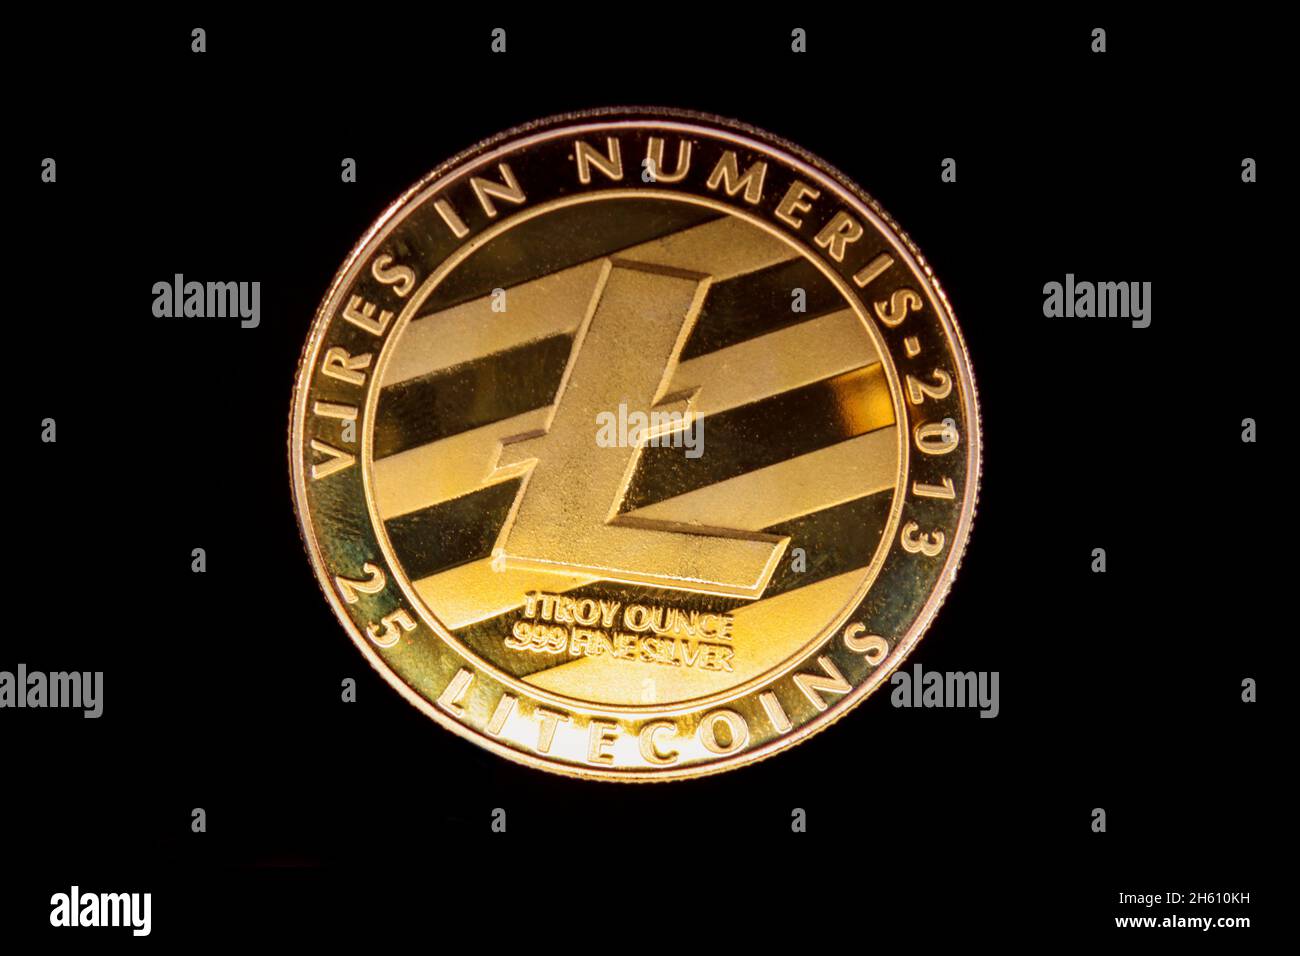 Litecoin LTC coin digital crypto currency Stock Photo